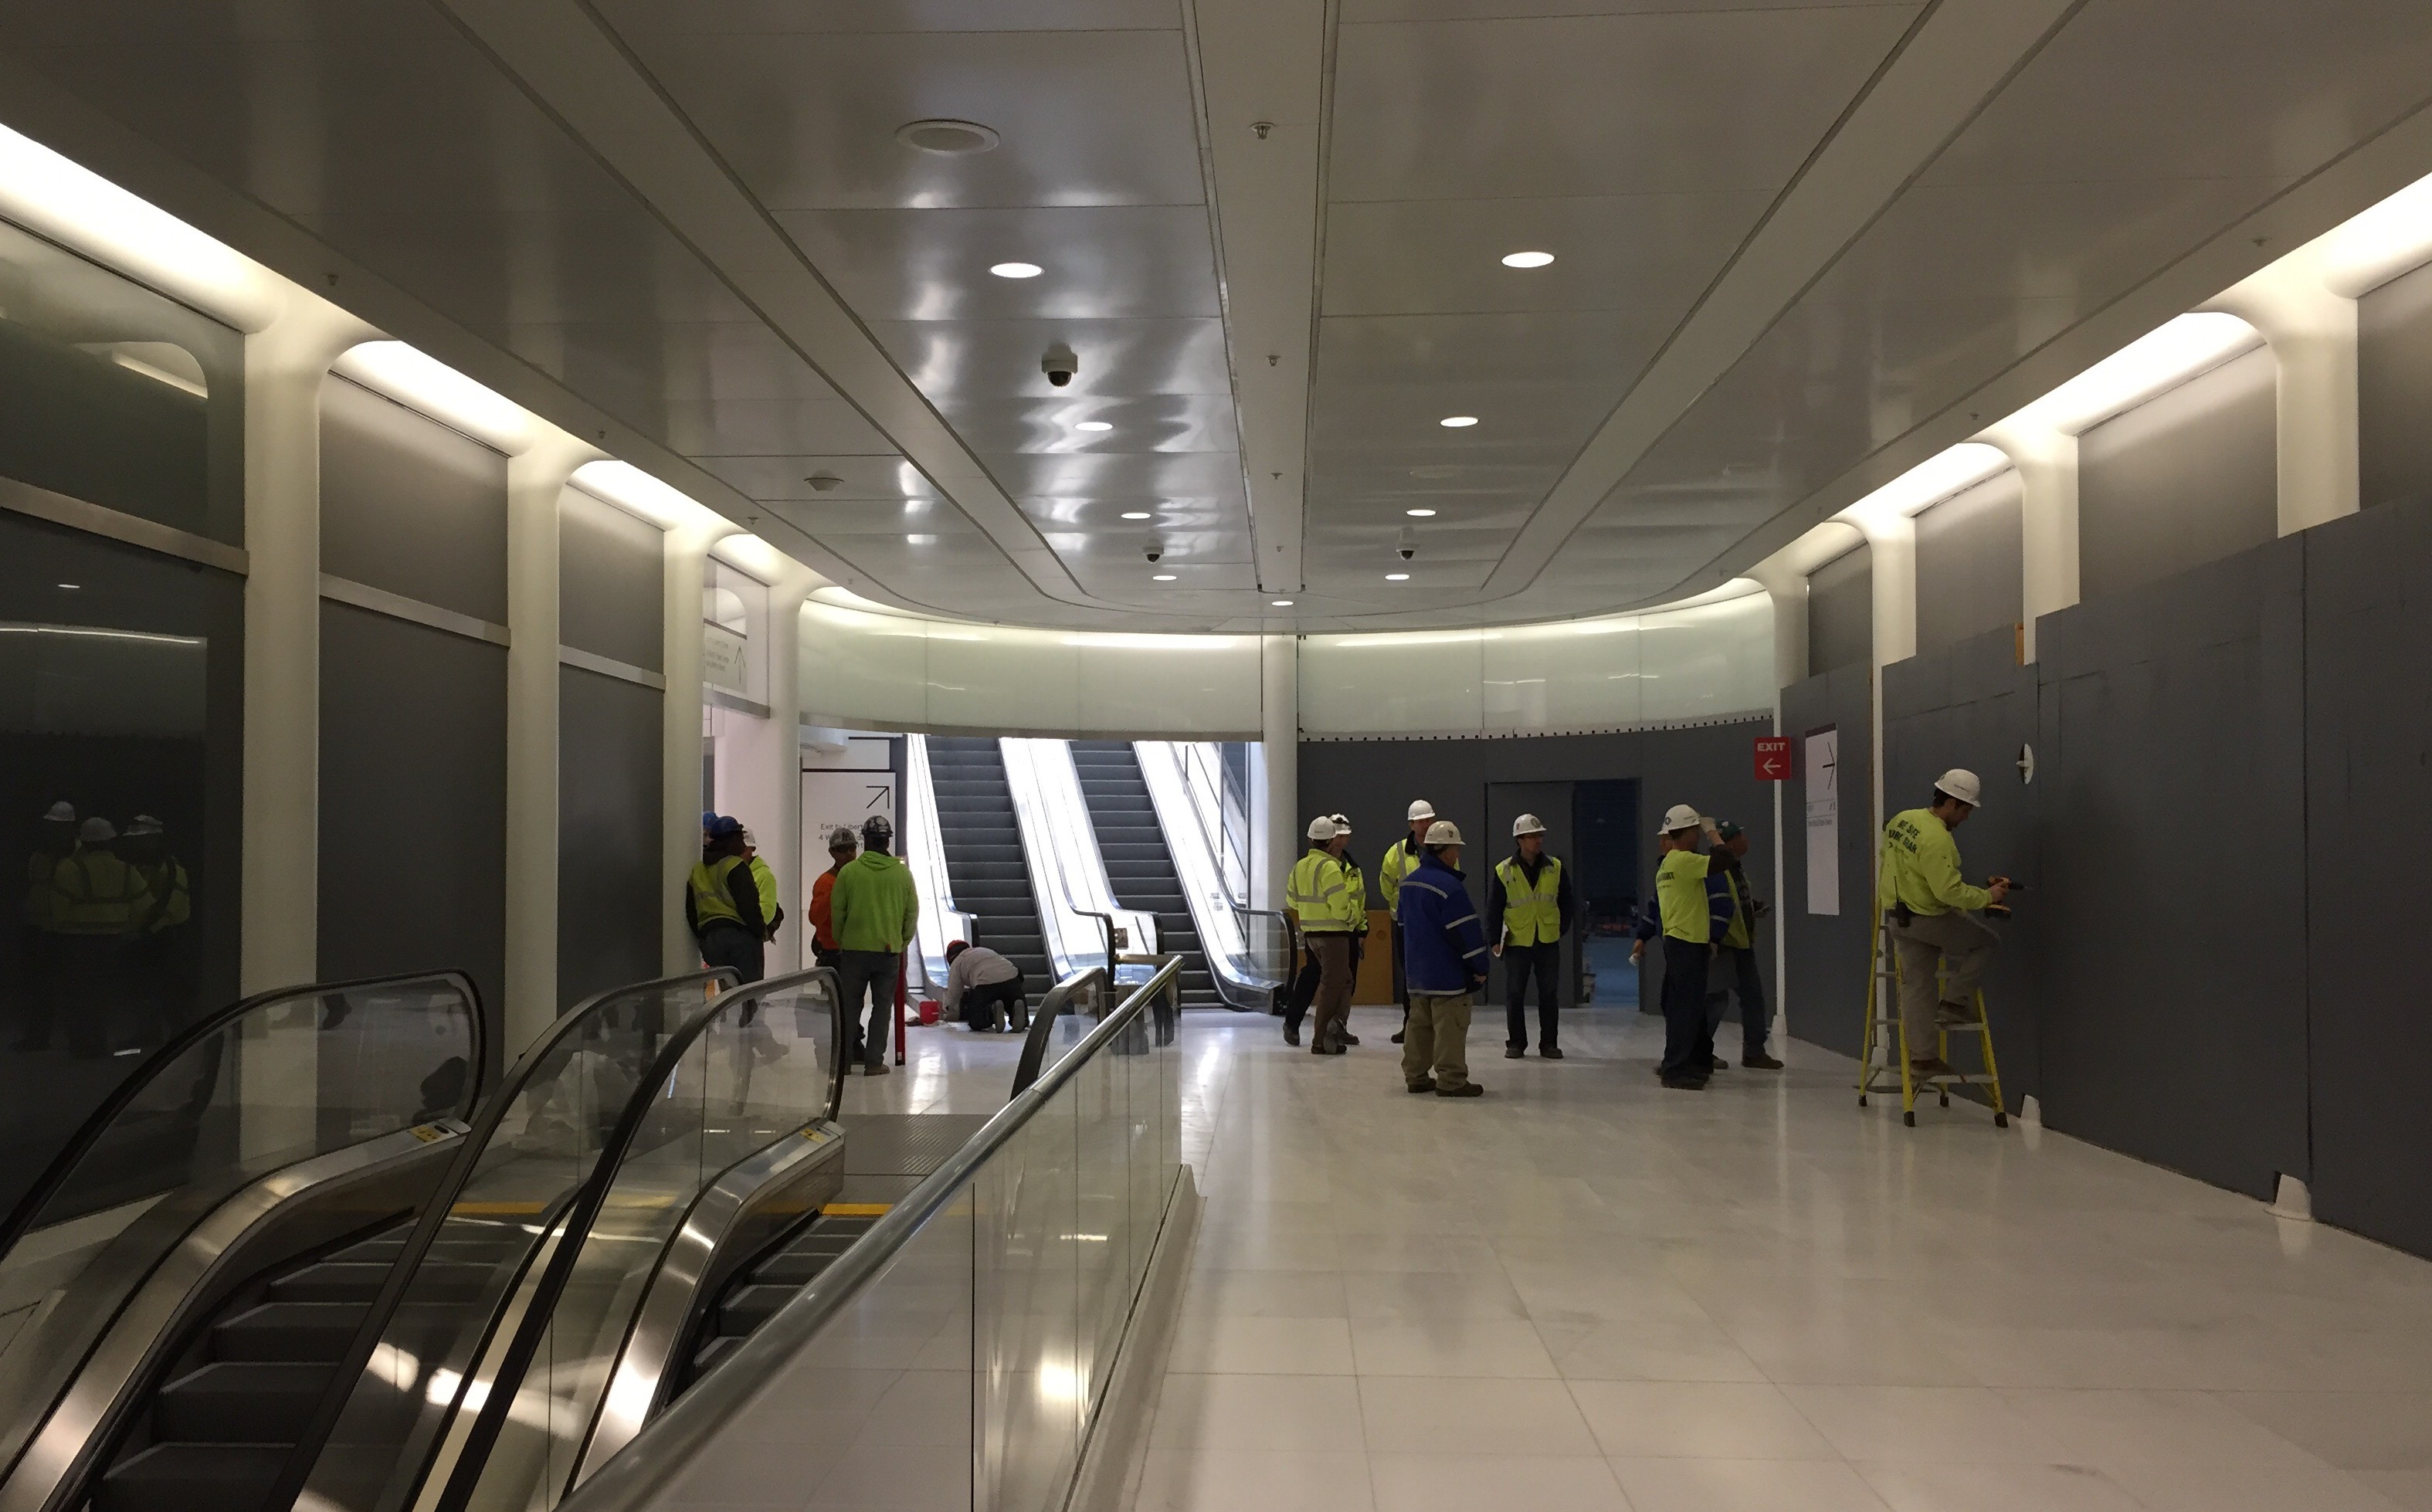 Inspections and finishing touches on the South Concourse and escalators to street level.